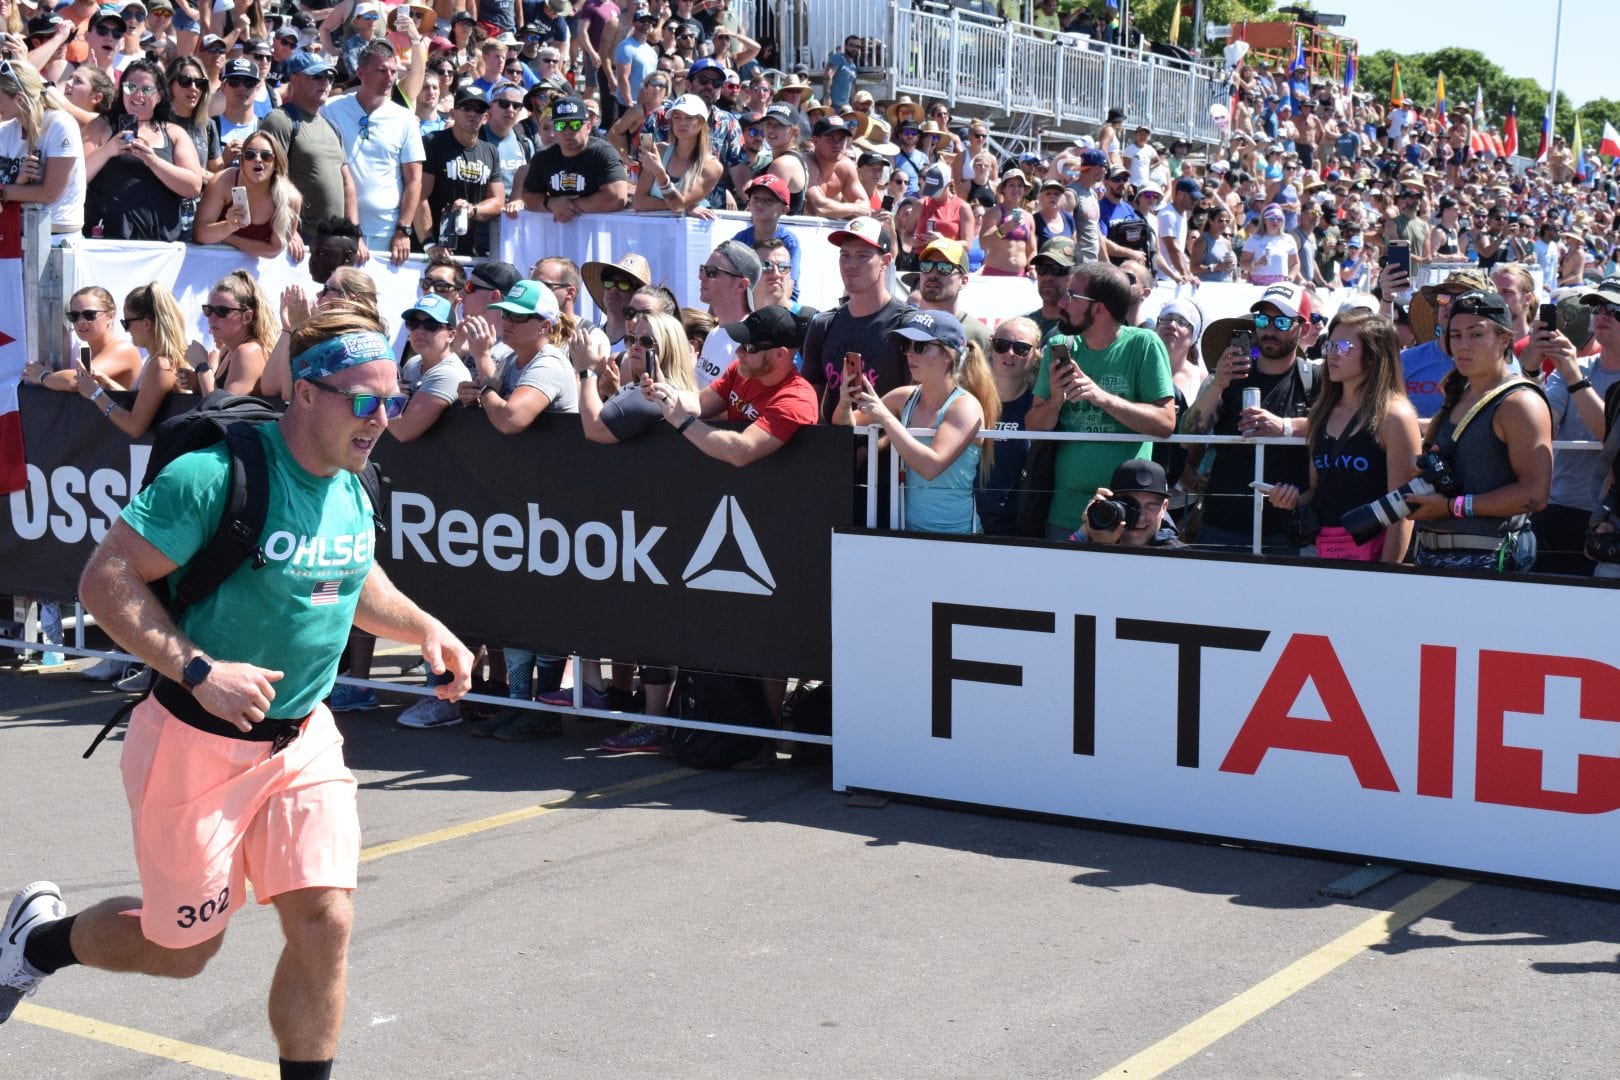 Noah Ohlsen completes the Ruck Run event at the 2019 CrossFIt Games.